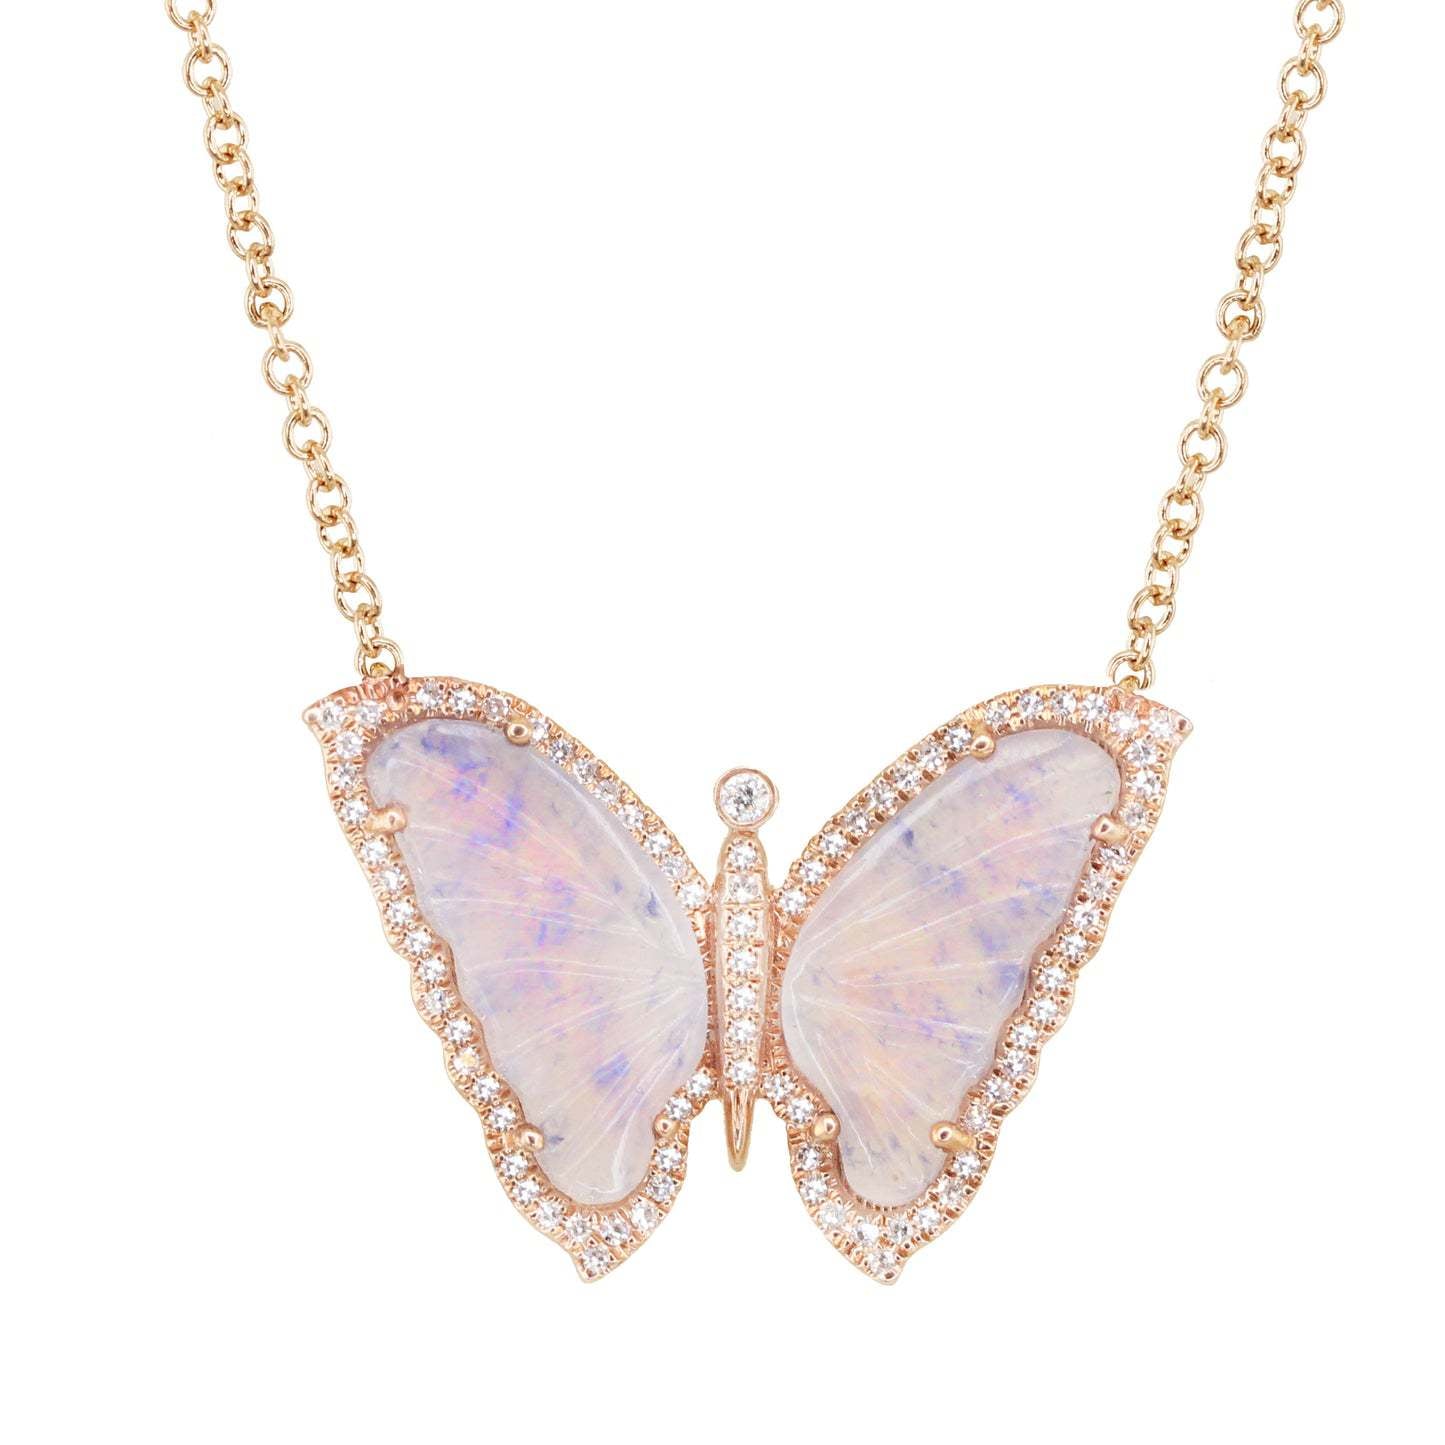 Small Acrylic Butterfly Necklace